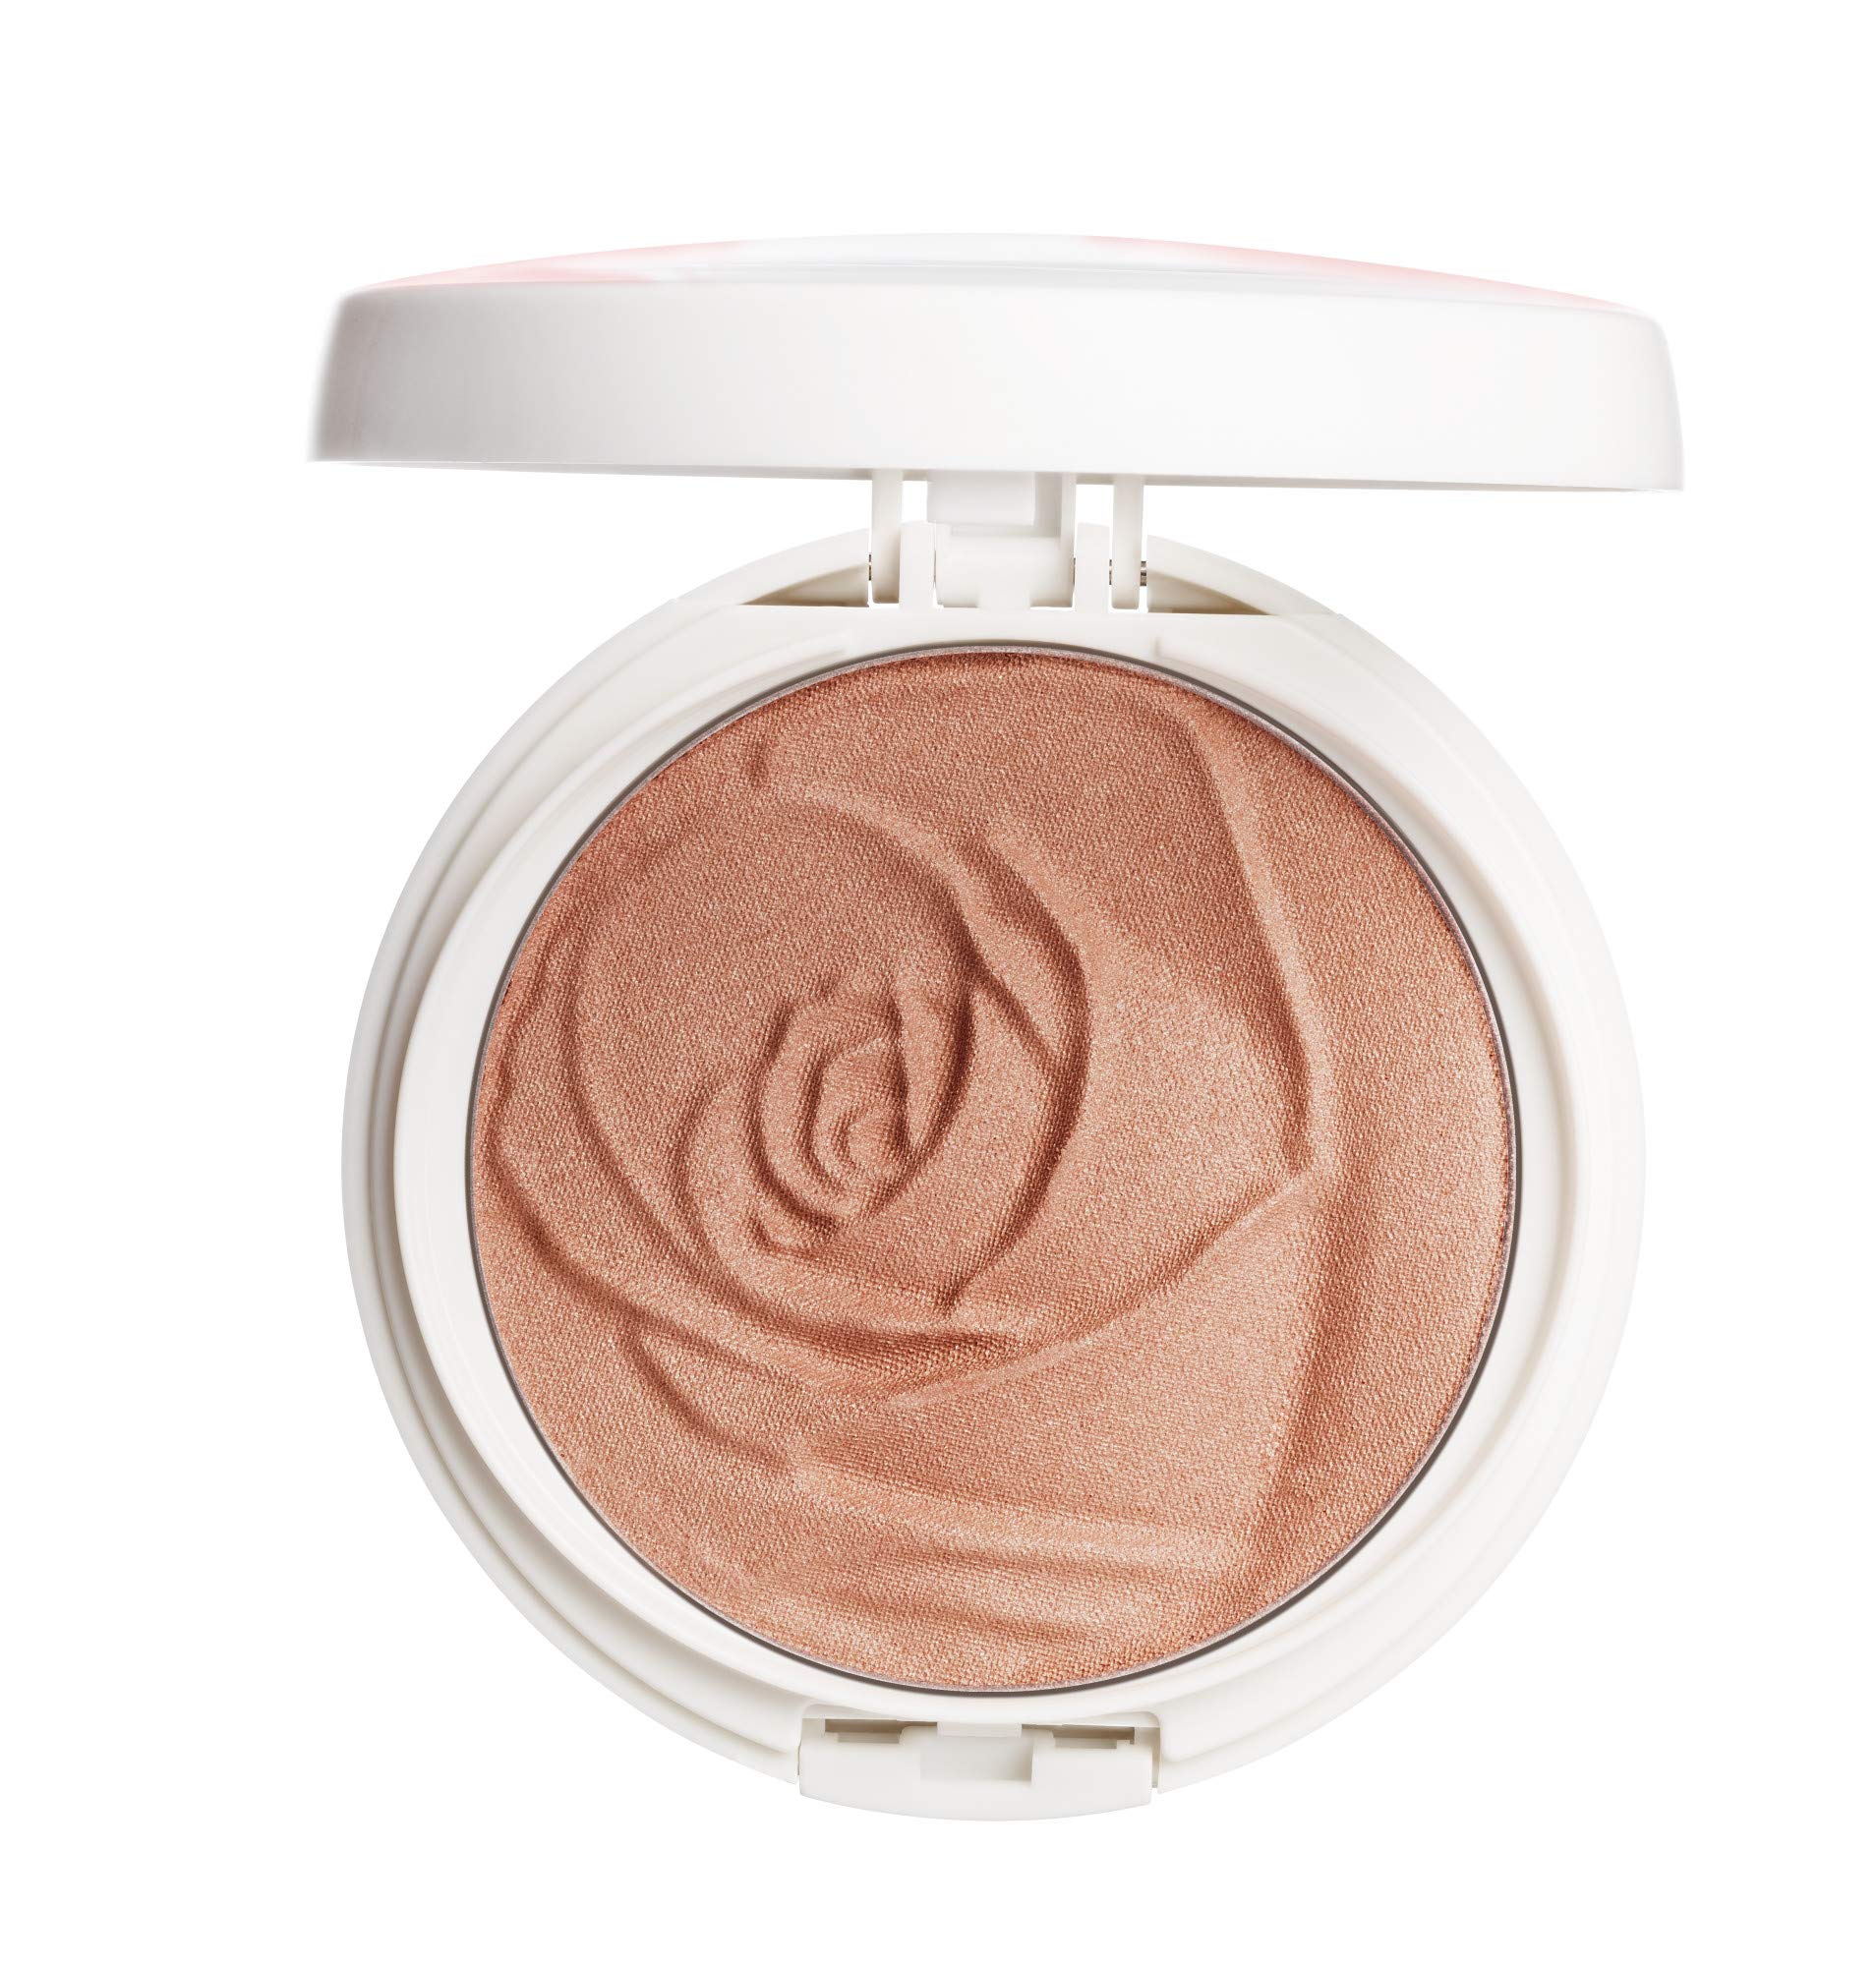 Physicians Formula Rosé All Day Set & Glow Highlighter Face Makeup Powder Sunlit Glow, Dermatologist Approved